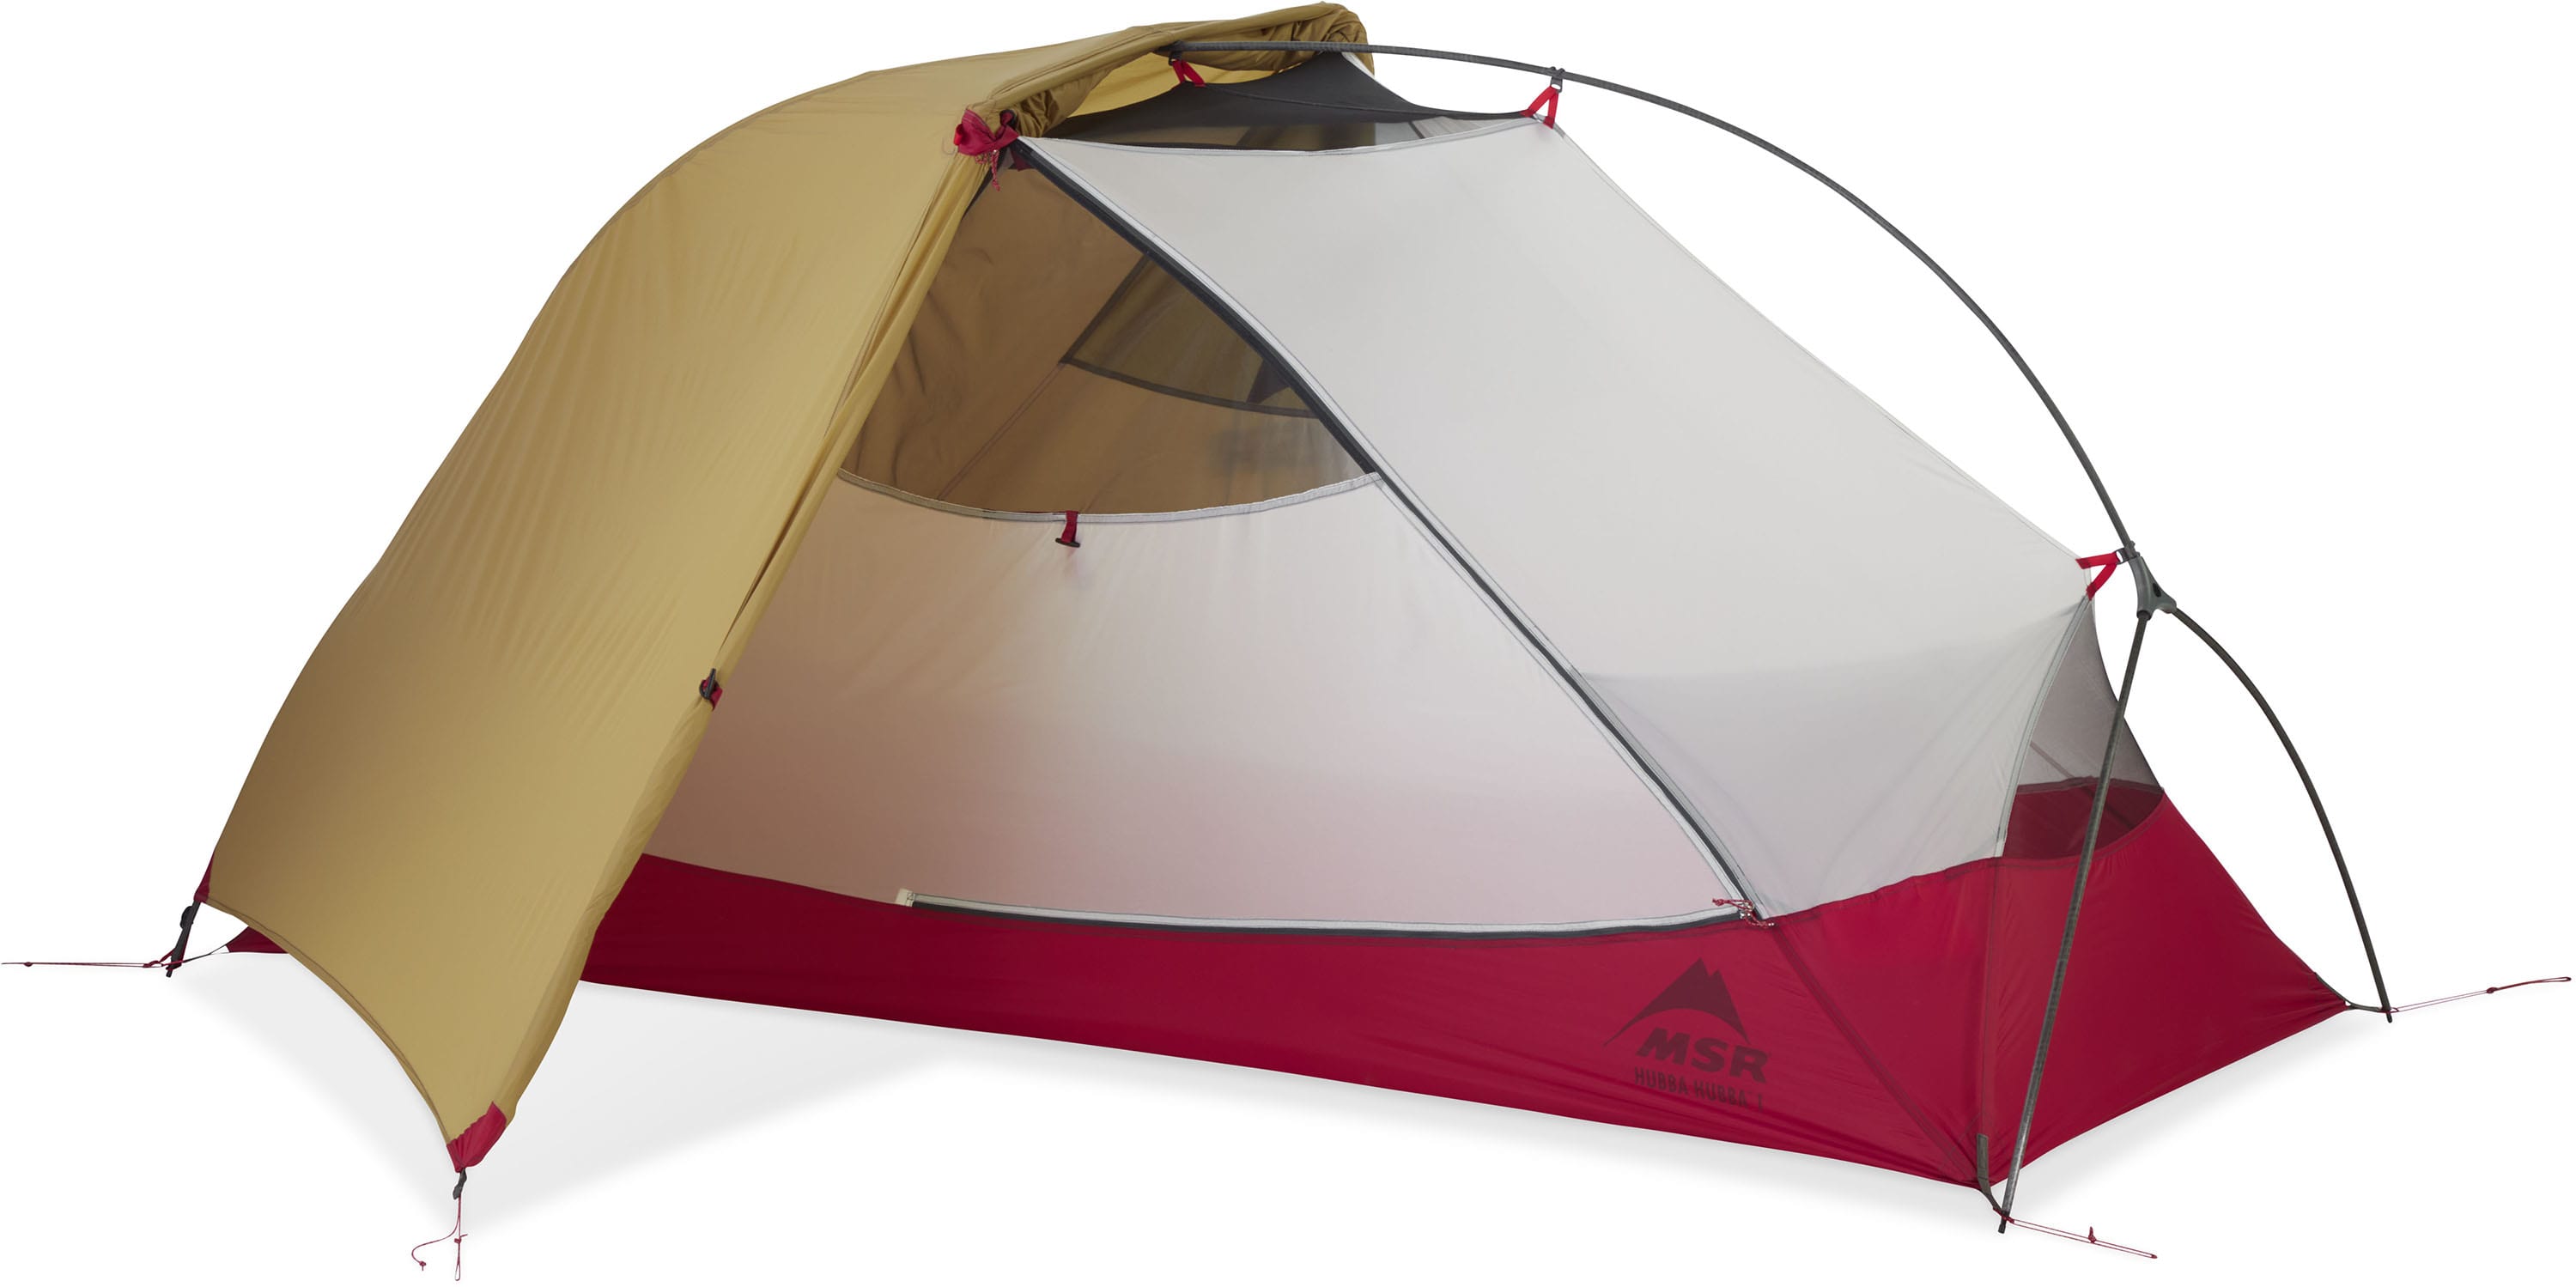 MSR® Hubba Hubba™ 1-Person Backpacking Tent